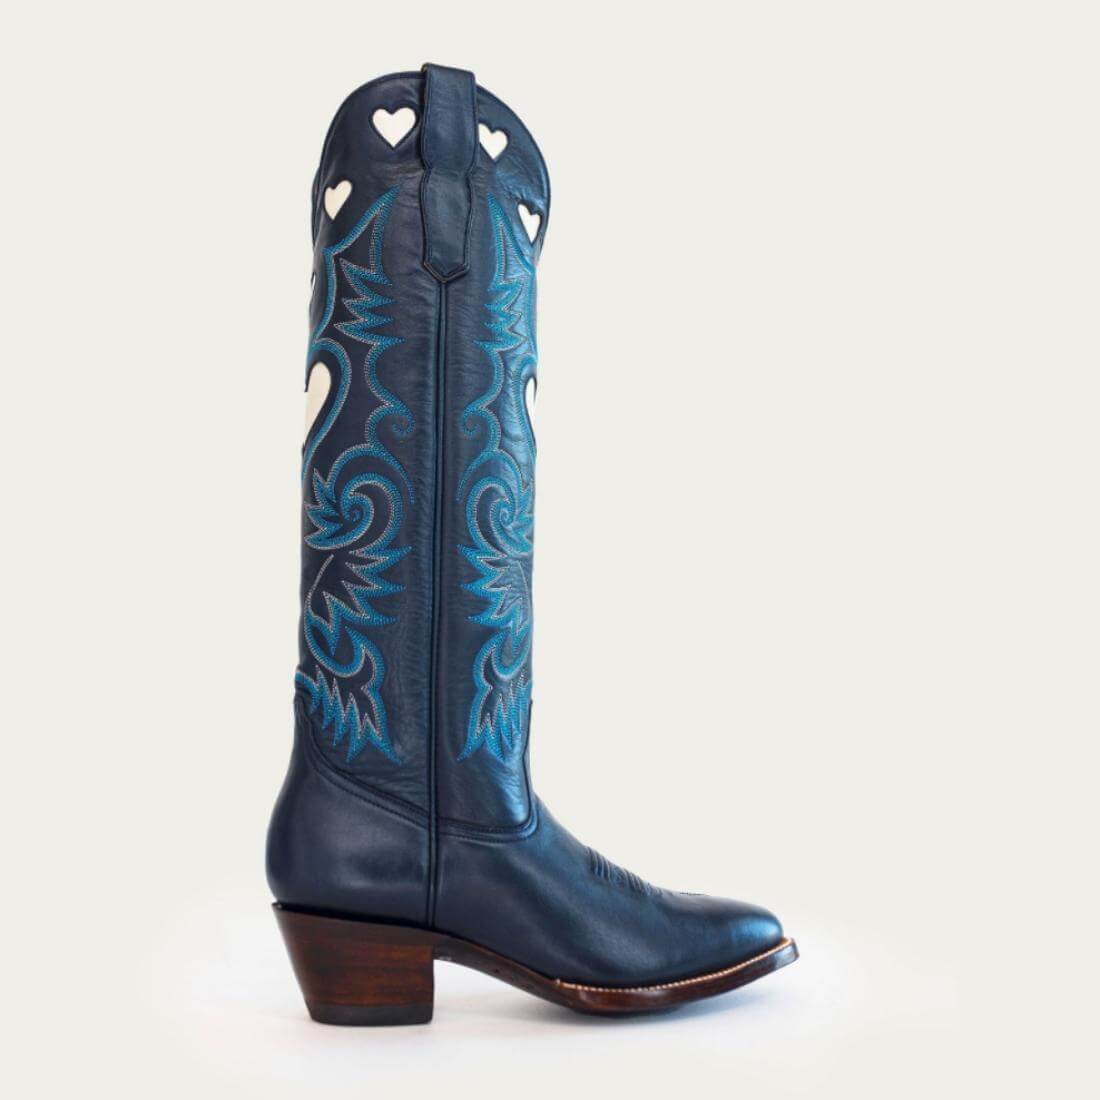 Navy Heart Boot Limited Edition, right profile